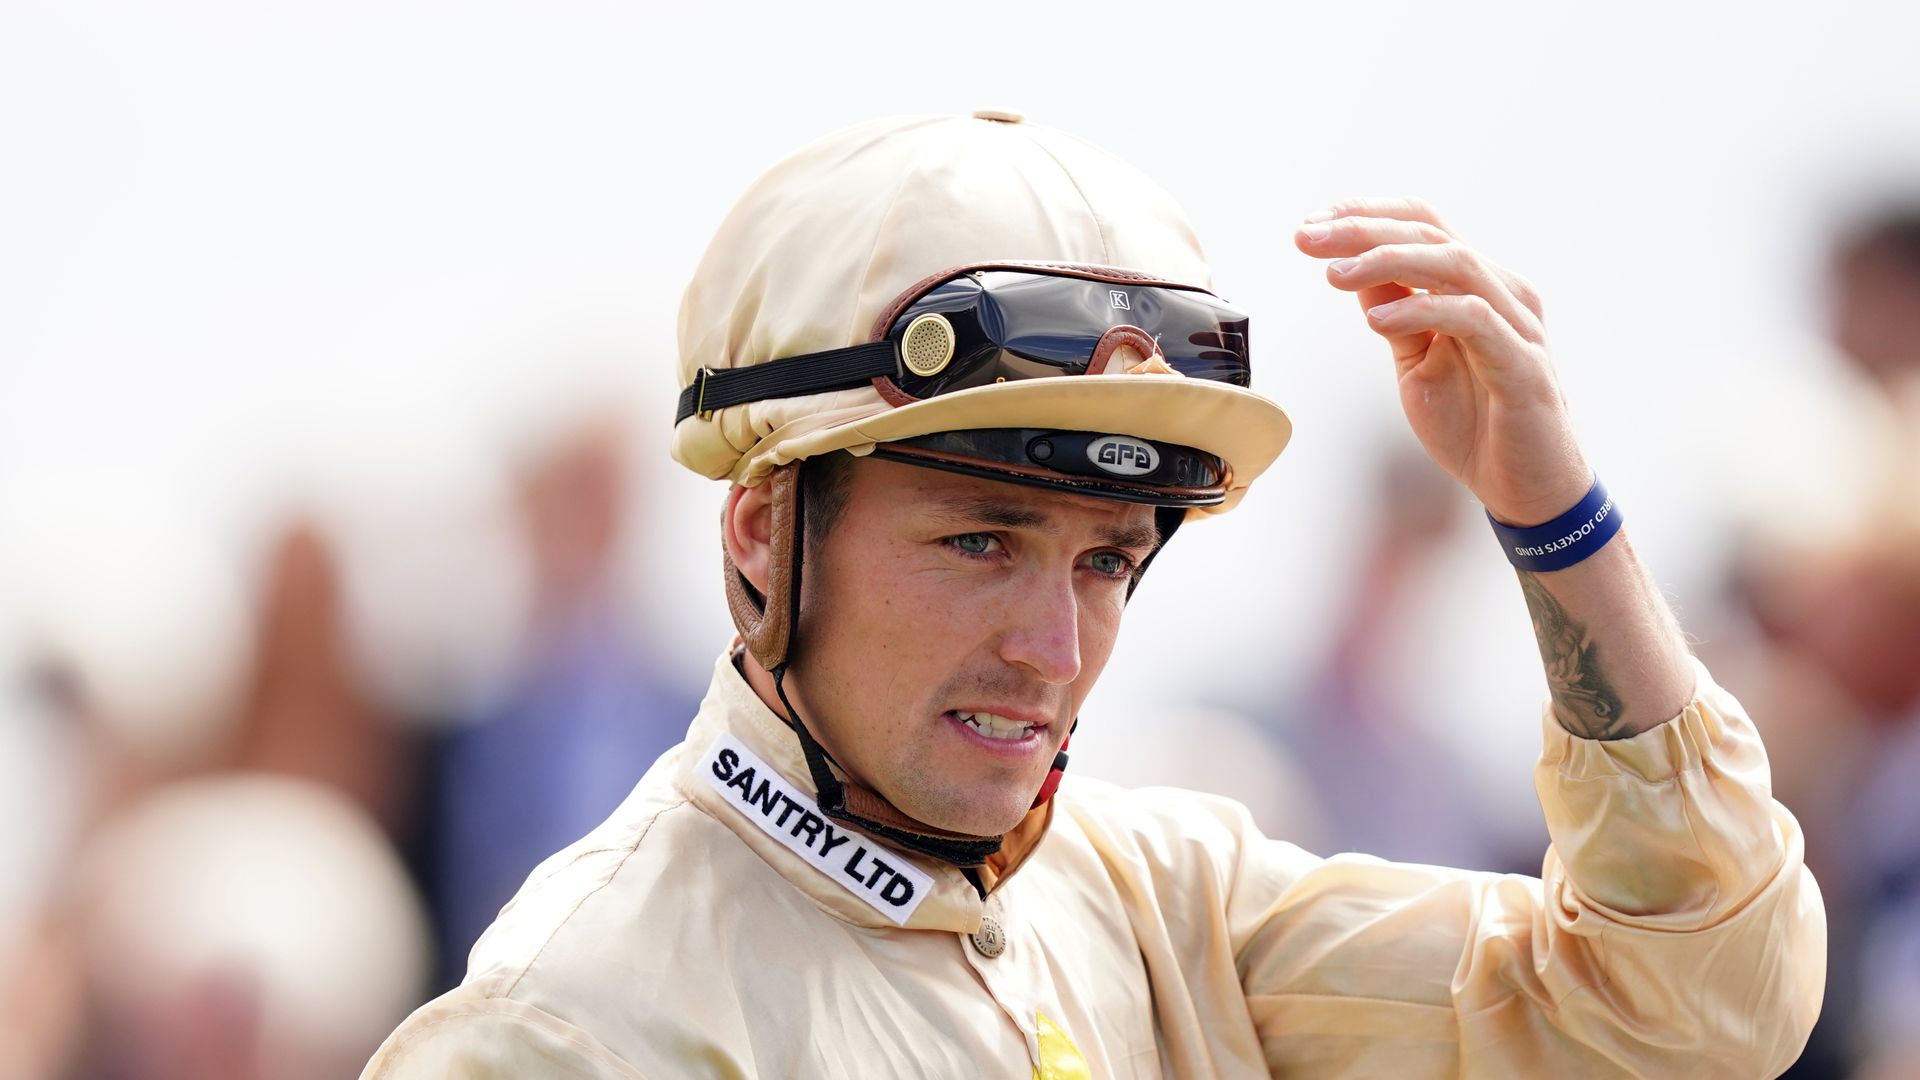 Title-chasing Stott set to star with seven rides at Lingfield